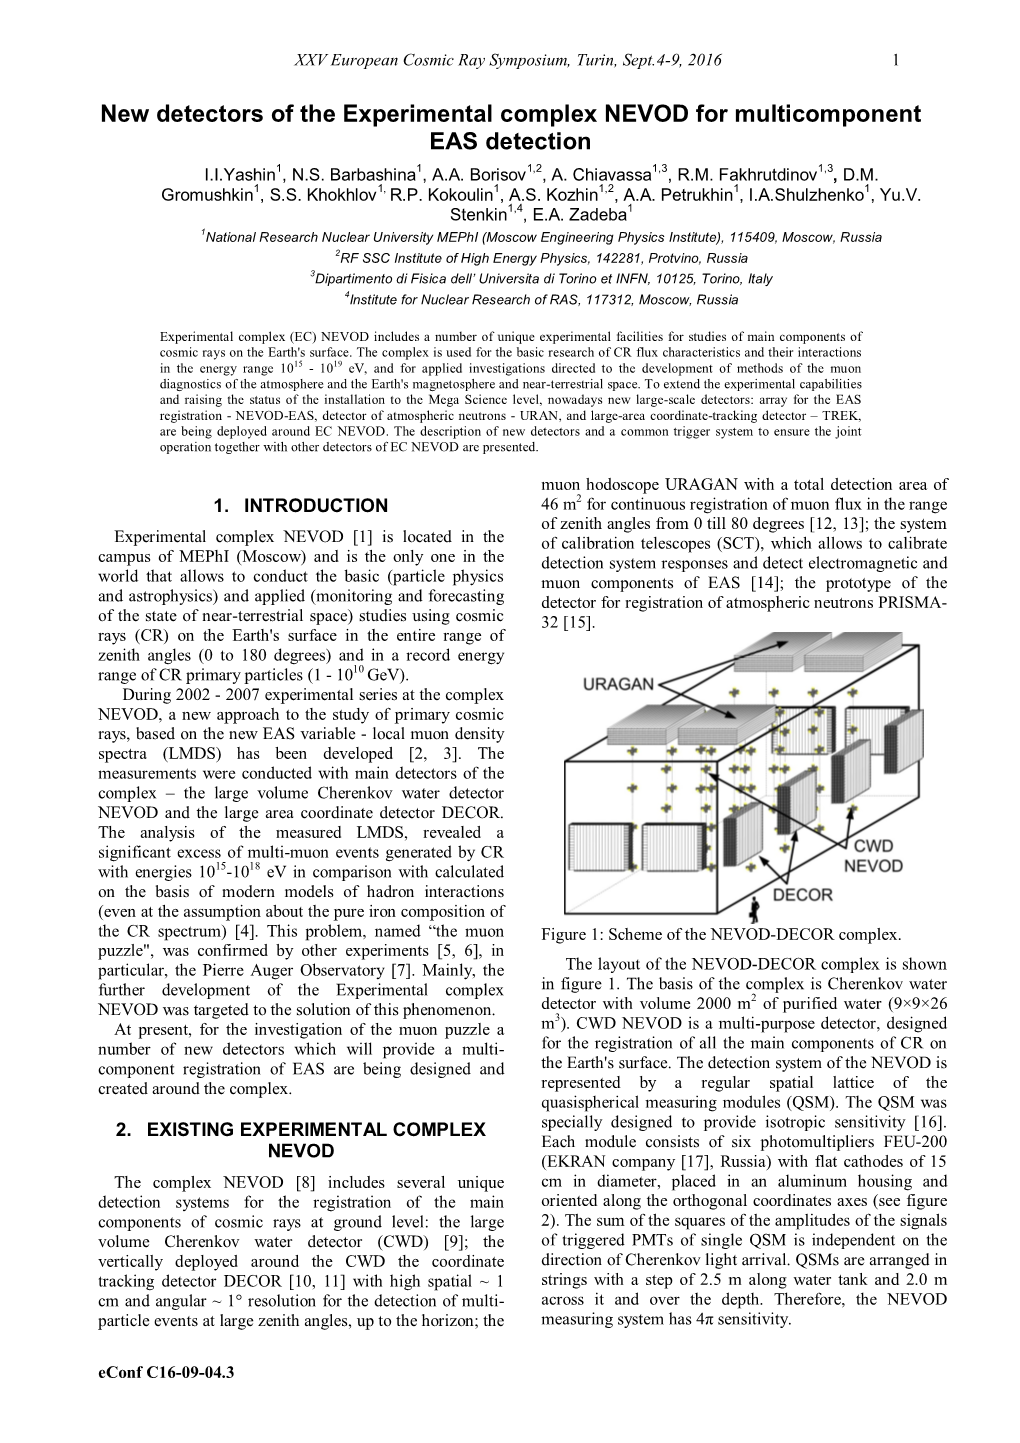 New Detectors of the Experimental Complex NEVOD for Multicomponent EAS Detection I.I.Yashin1, N.S